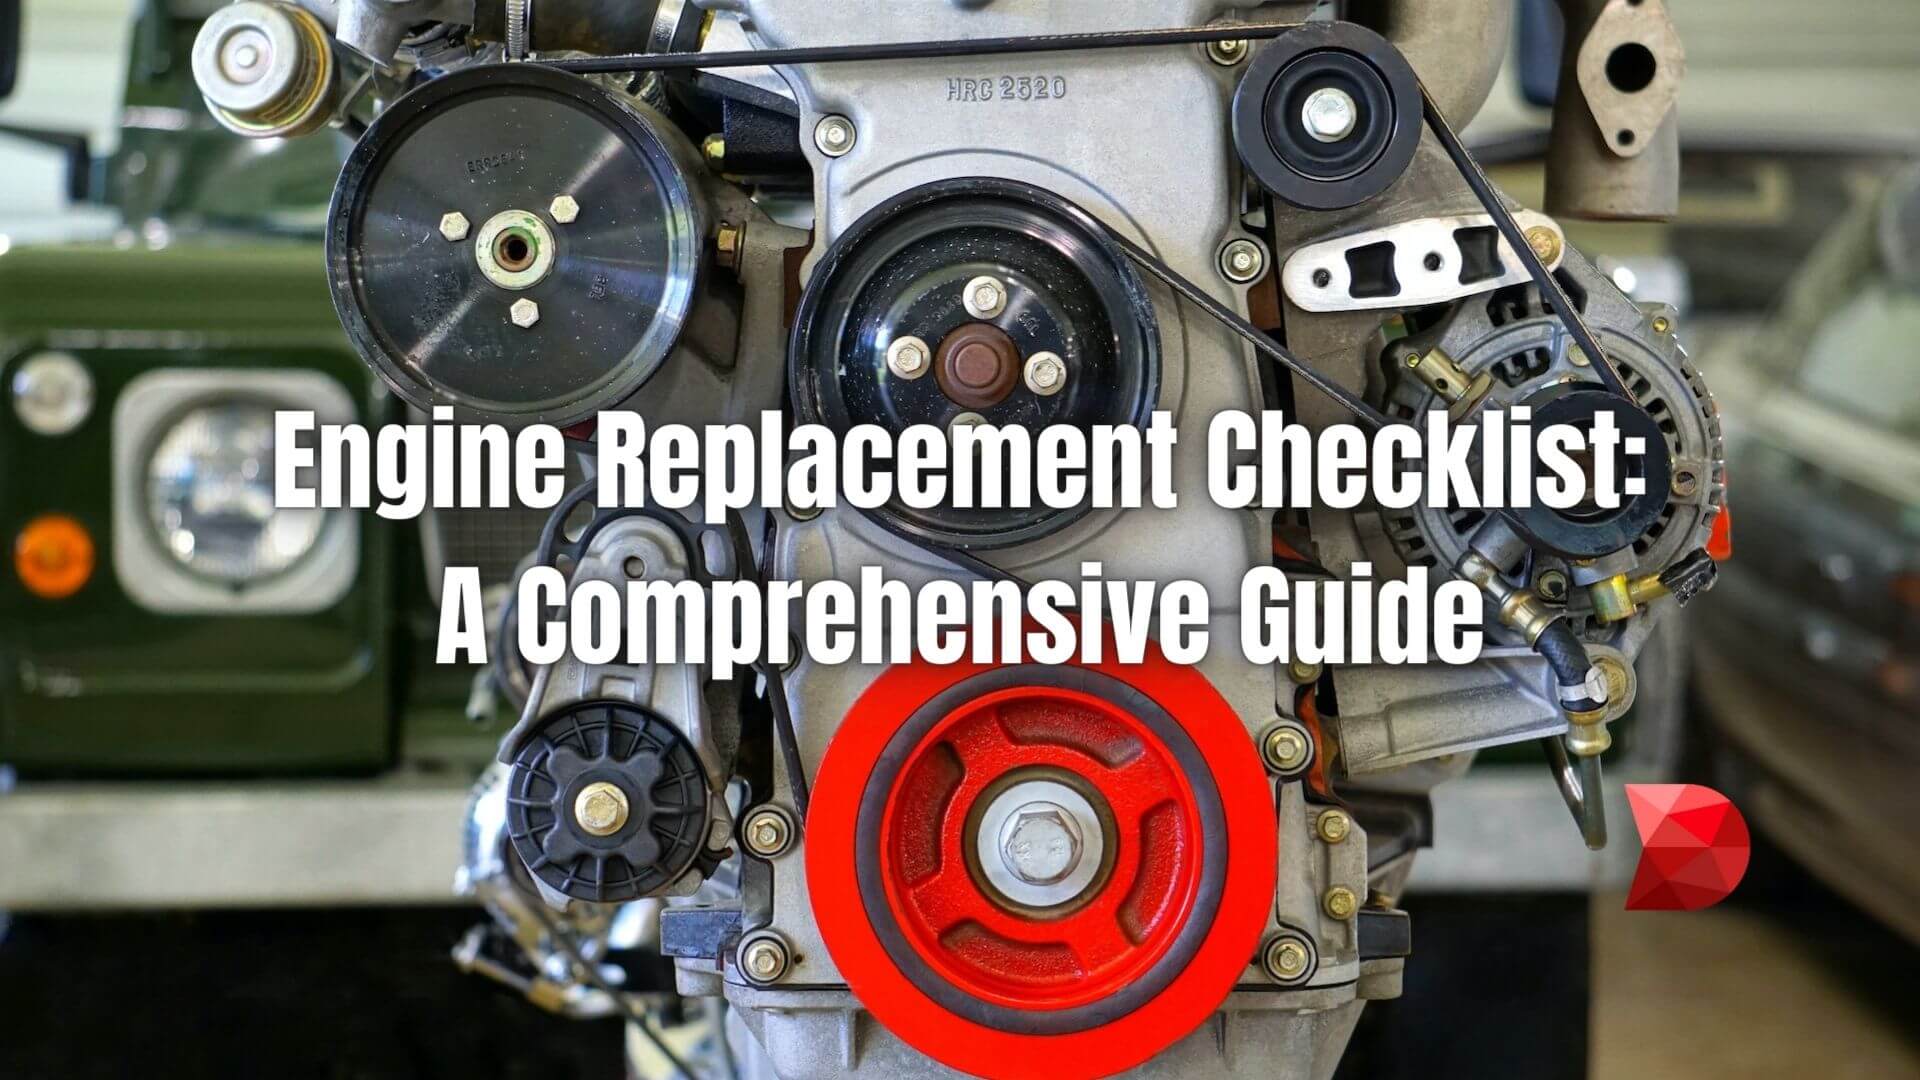 How to Replace Piston Rings Without Removing Engine: A Step-by-Step Guide